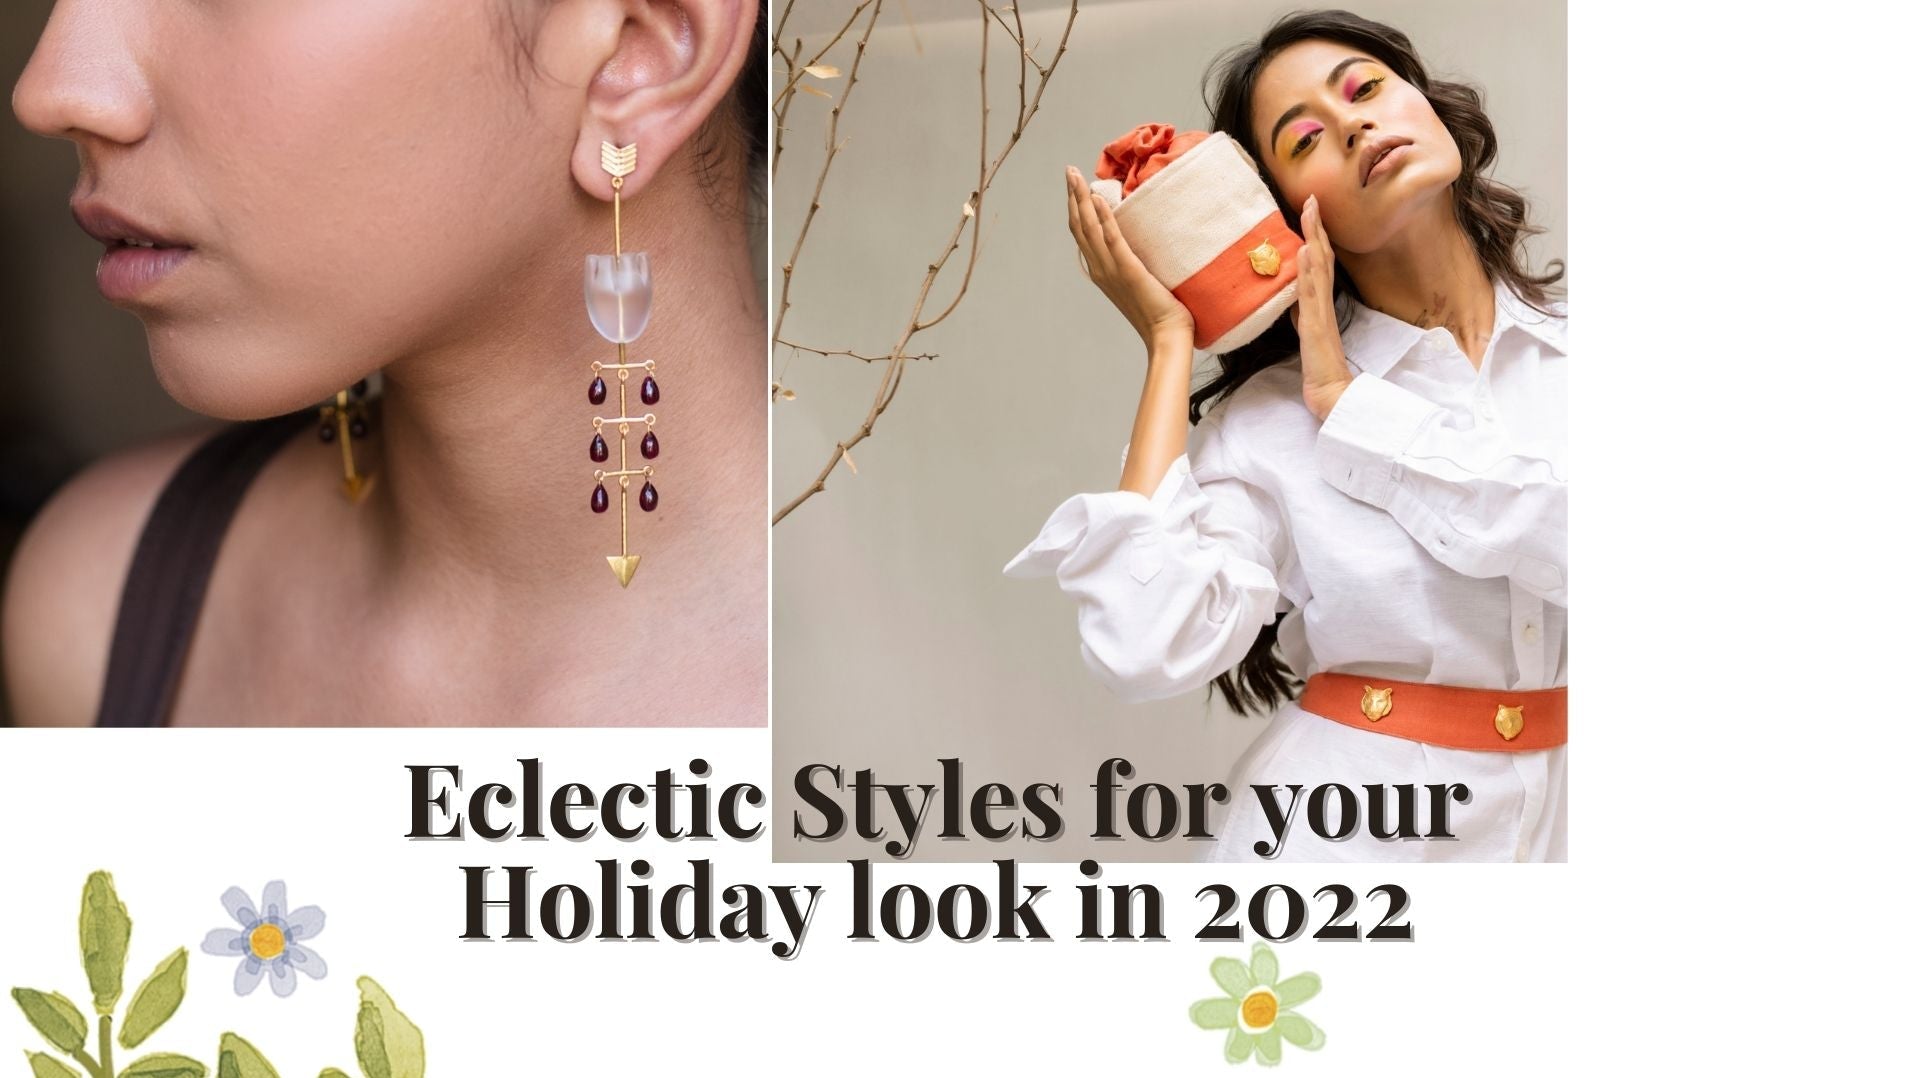 Eclectic Styles for your Holiday look in 2022 - Ciceroni